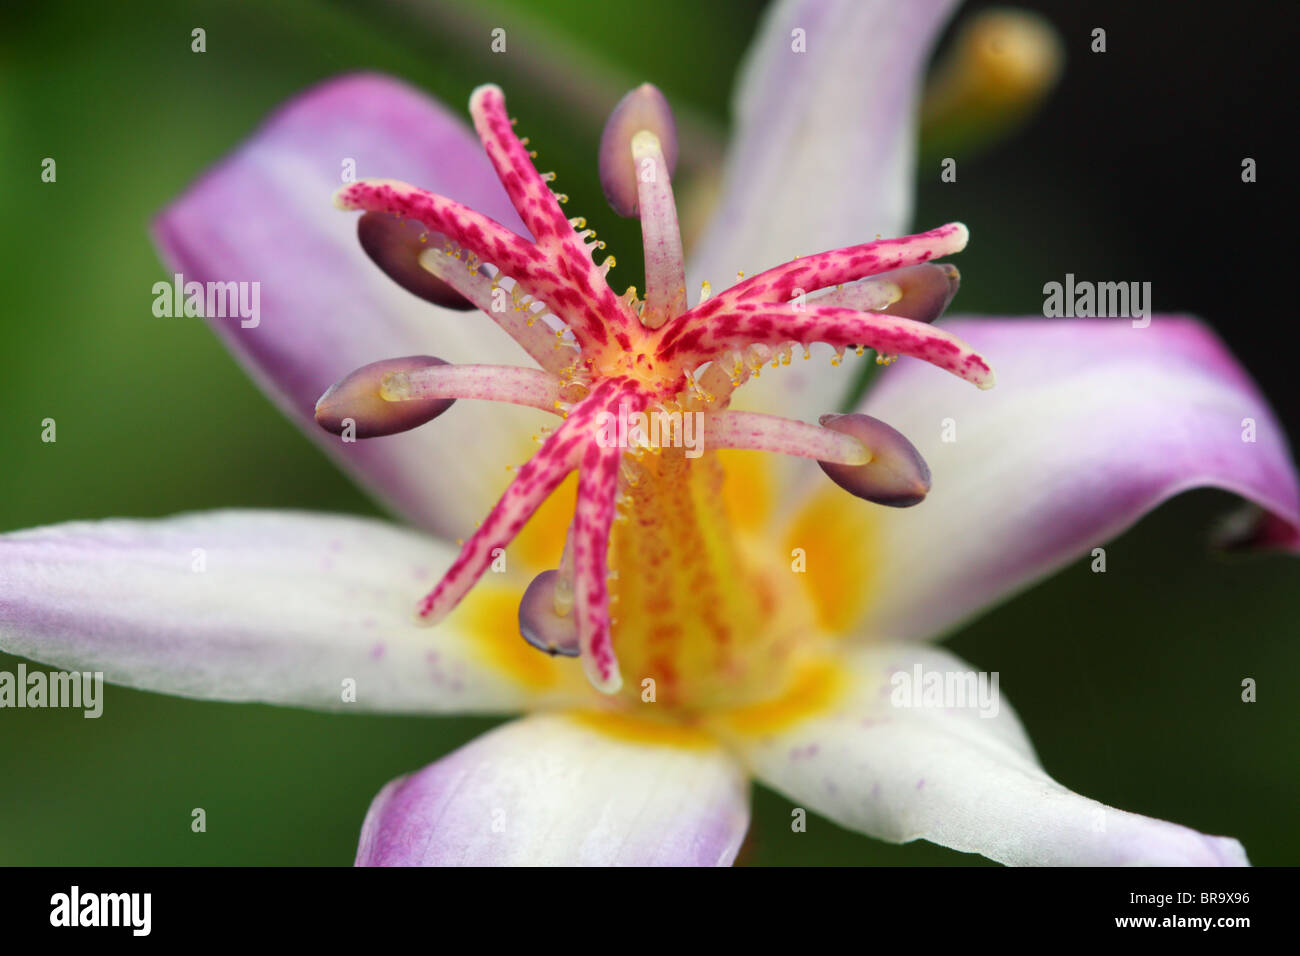 Toad lily flower close up Tricyrtis hirta Stock Photo